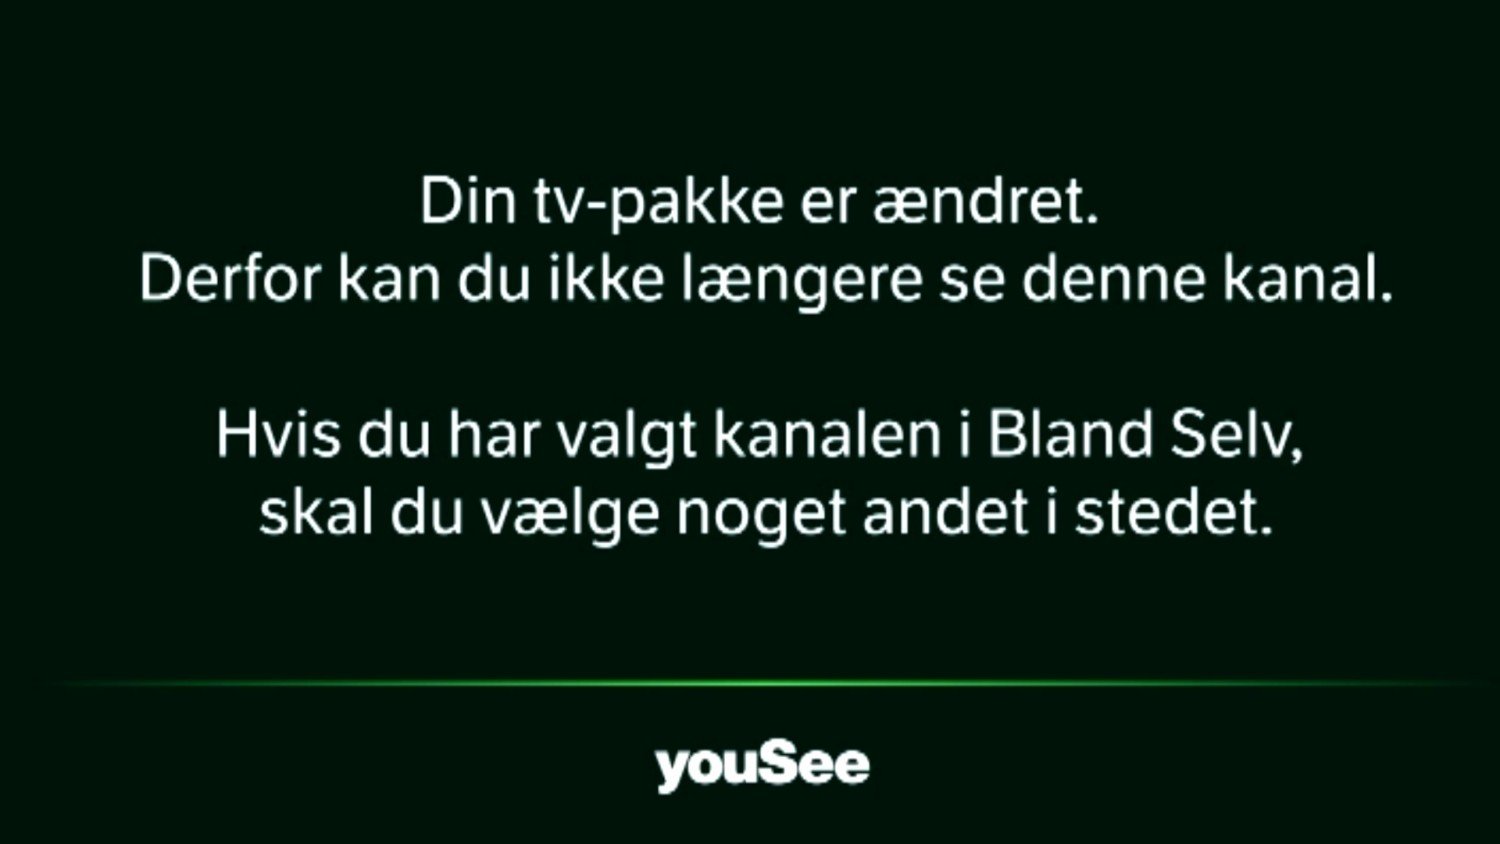 YouSee har ikke Discovery Networks tv-kanaler